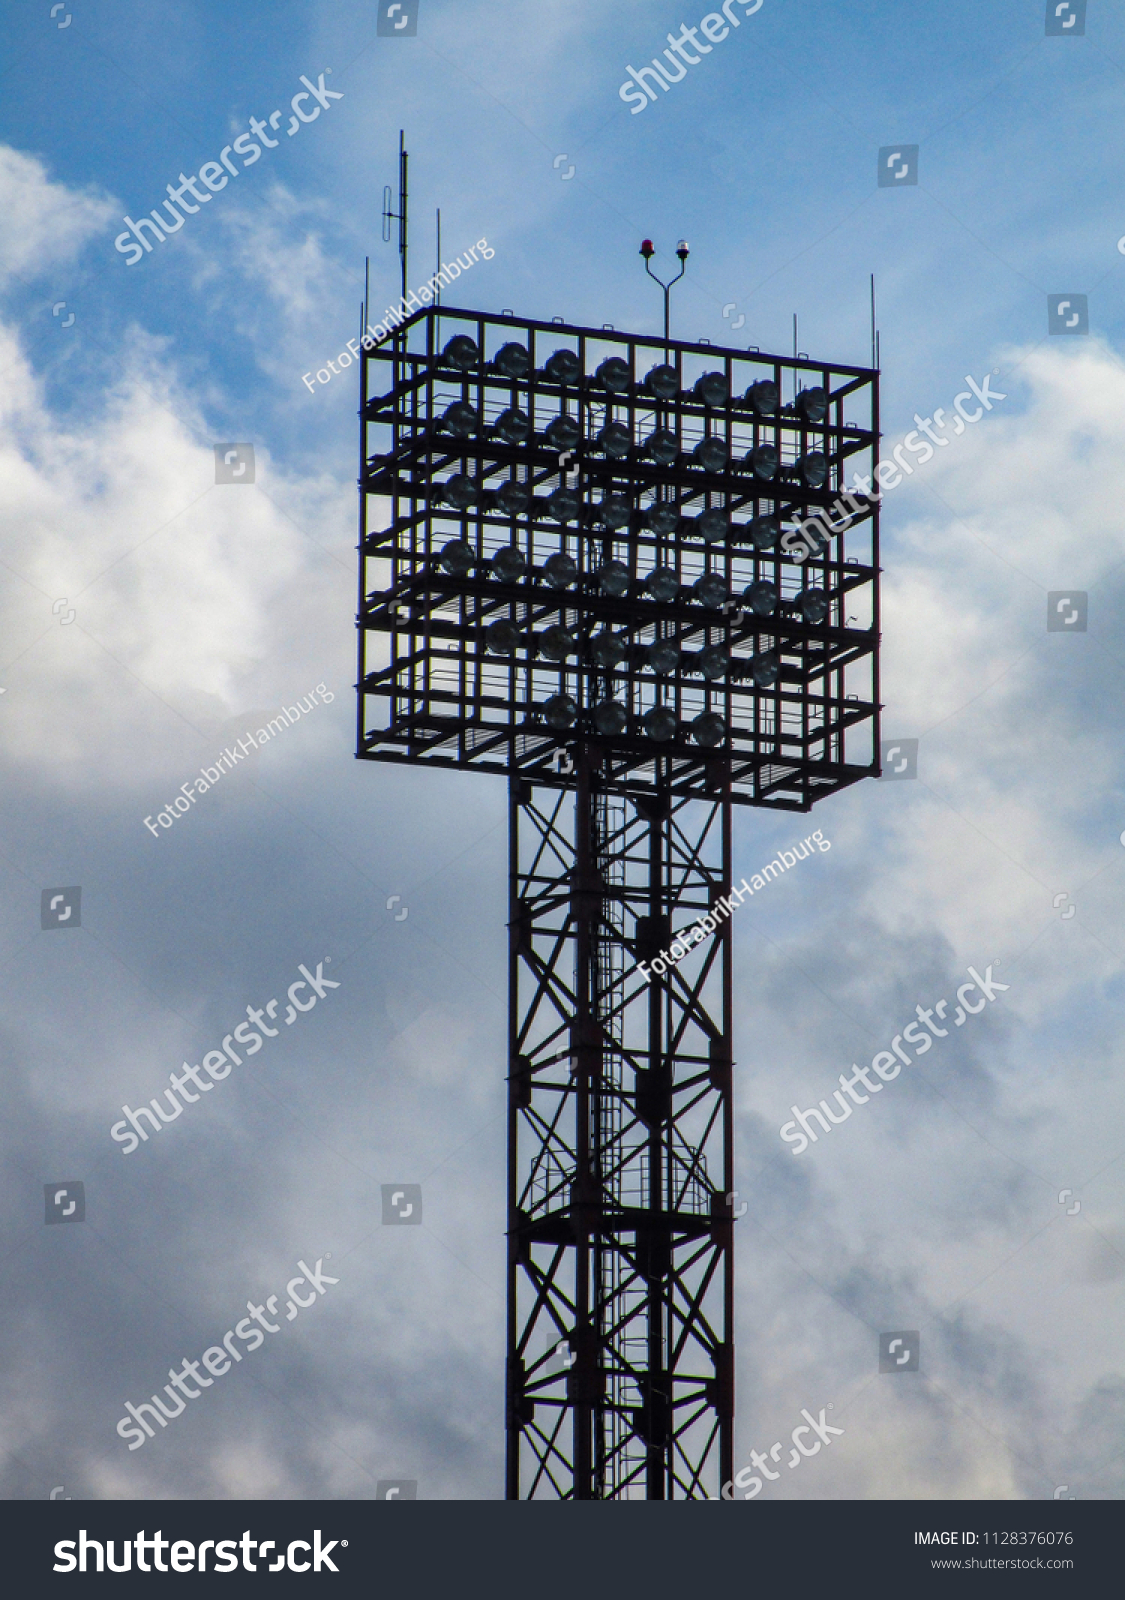 Floodlight pylons in a football stadium in Lithuania #1128376076